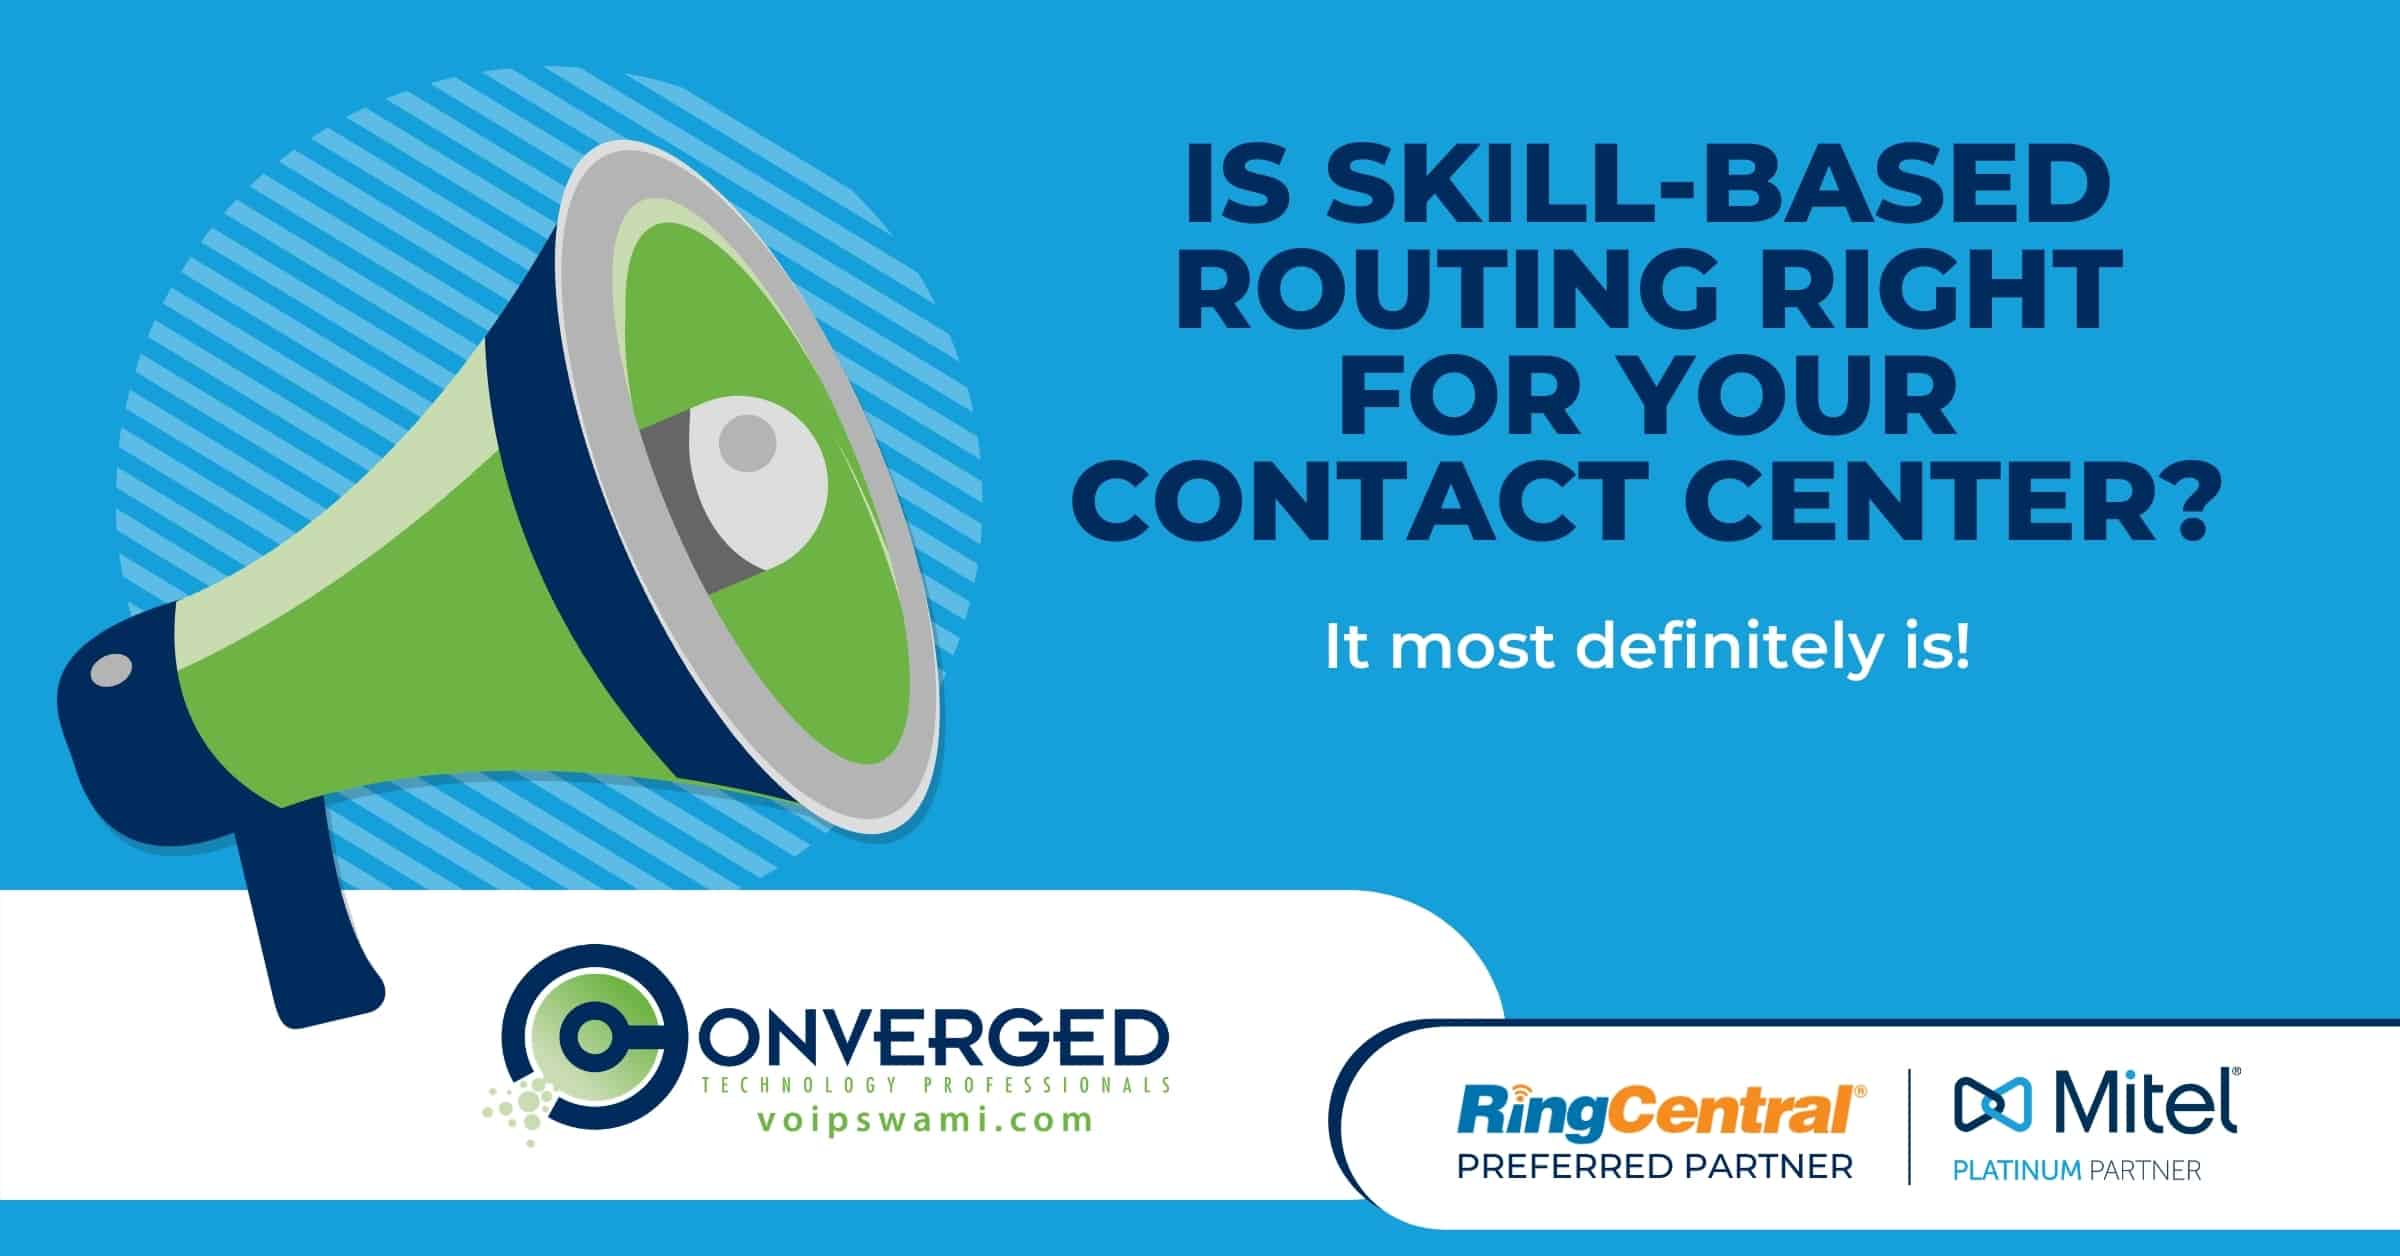 Is Skill-based Routing Right for Your Contact Center?